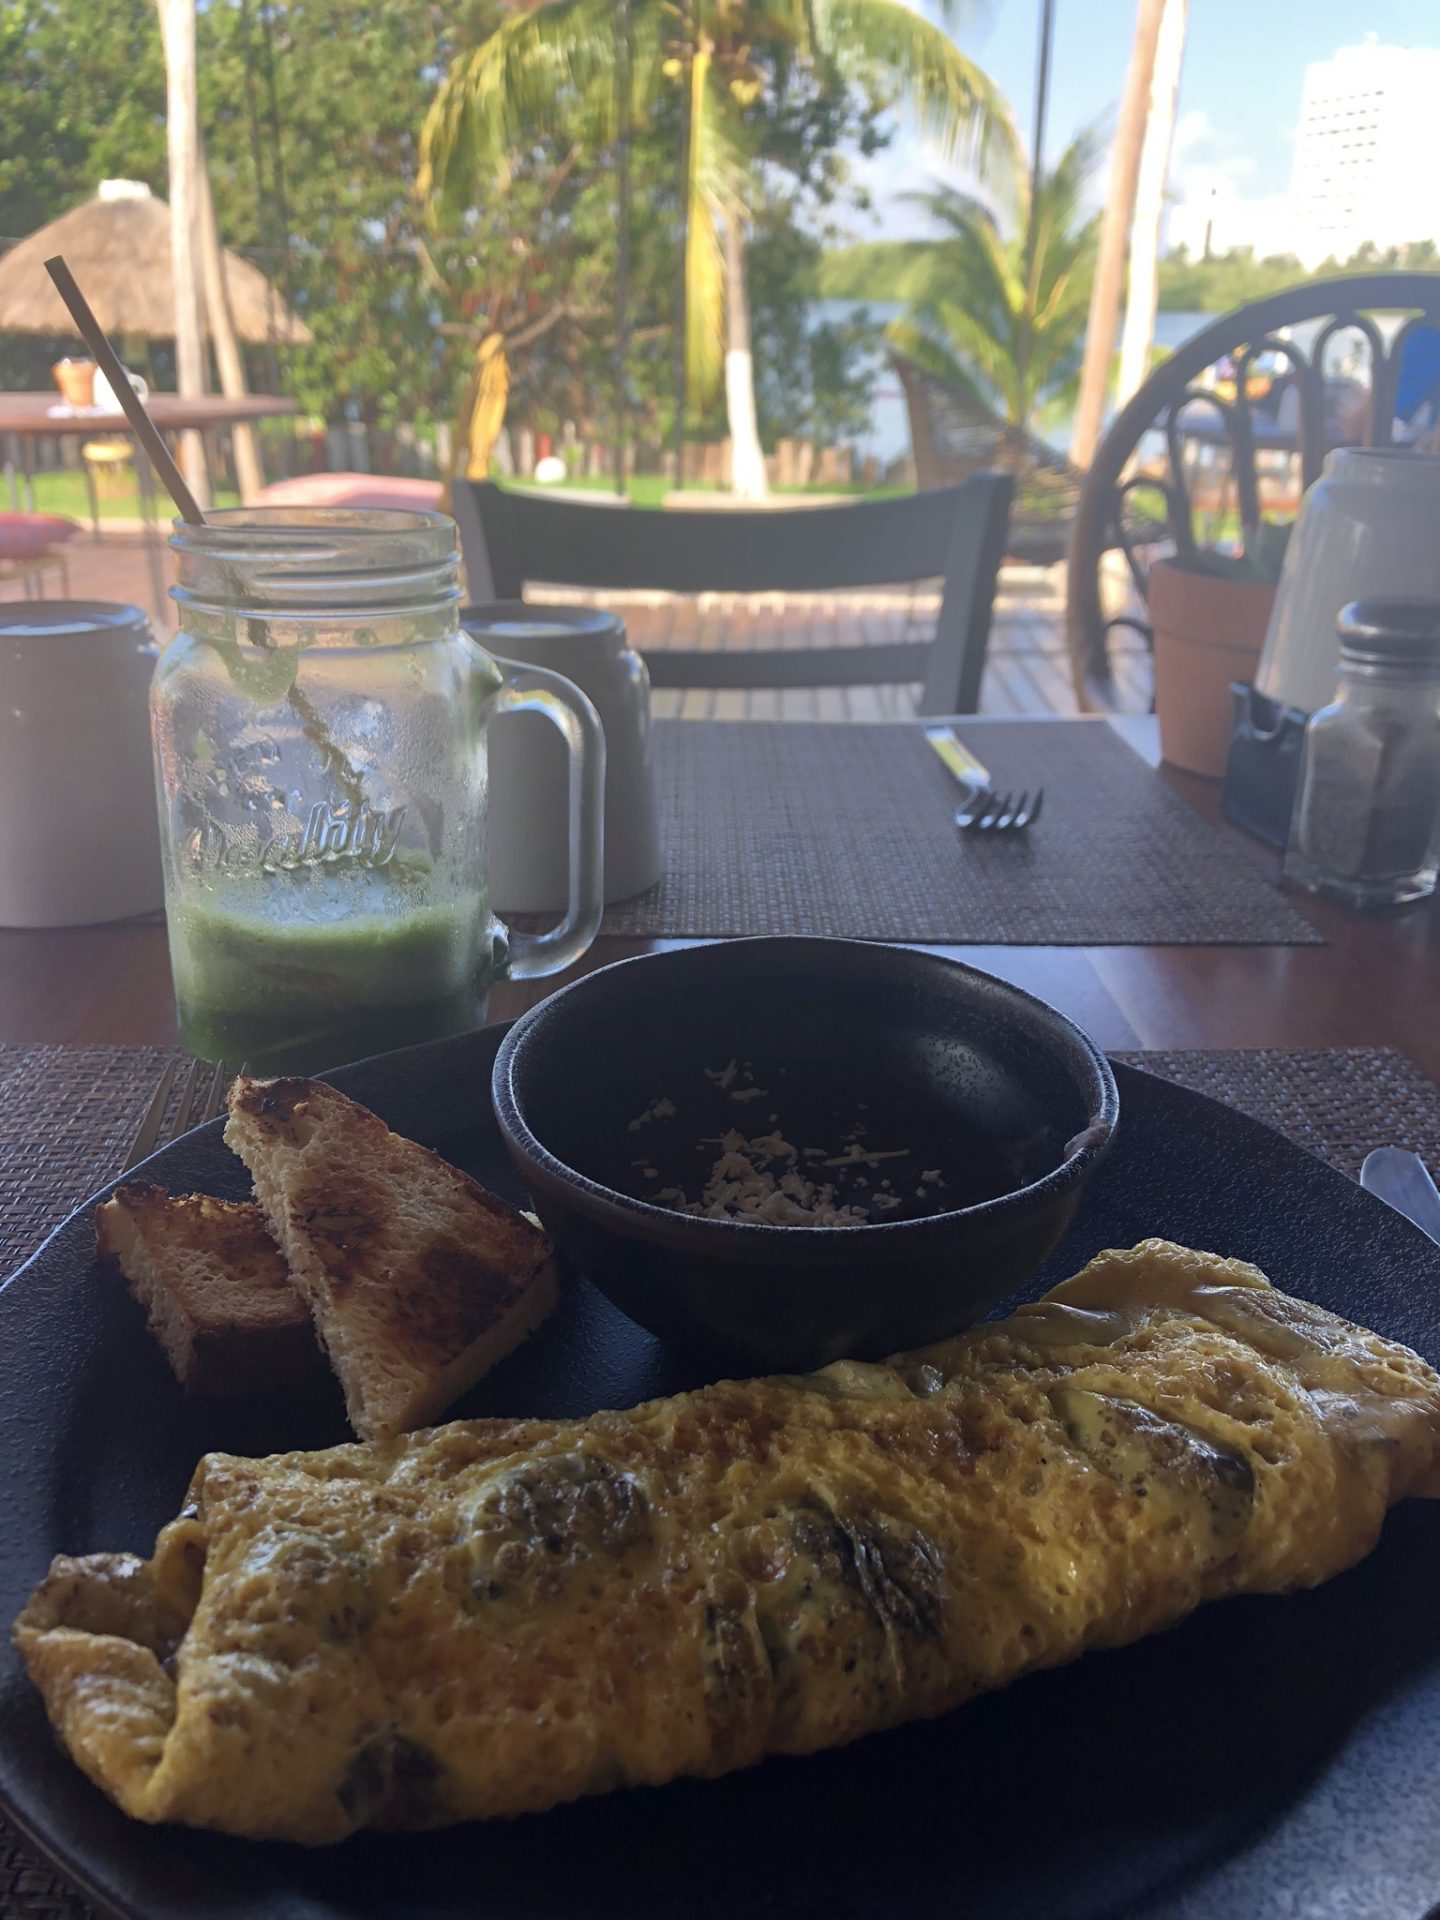 Omelette at Selina, Cancun in Mexico